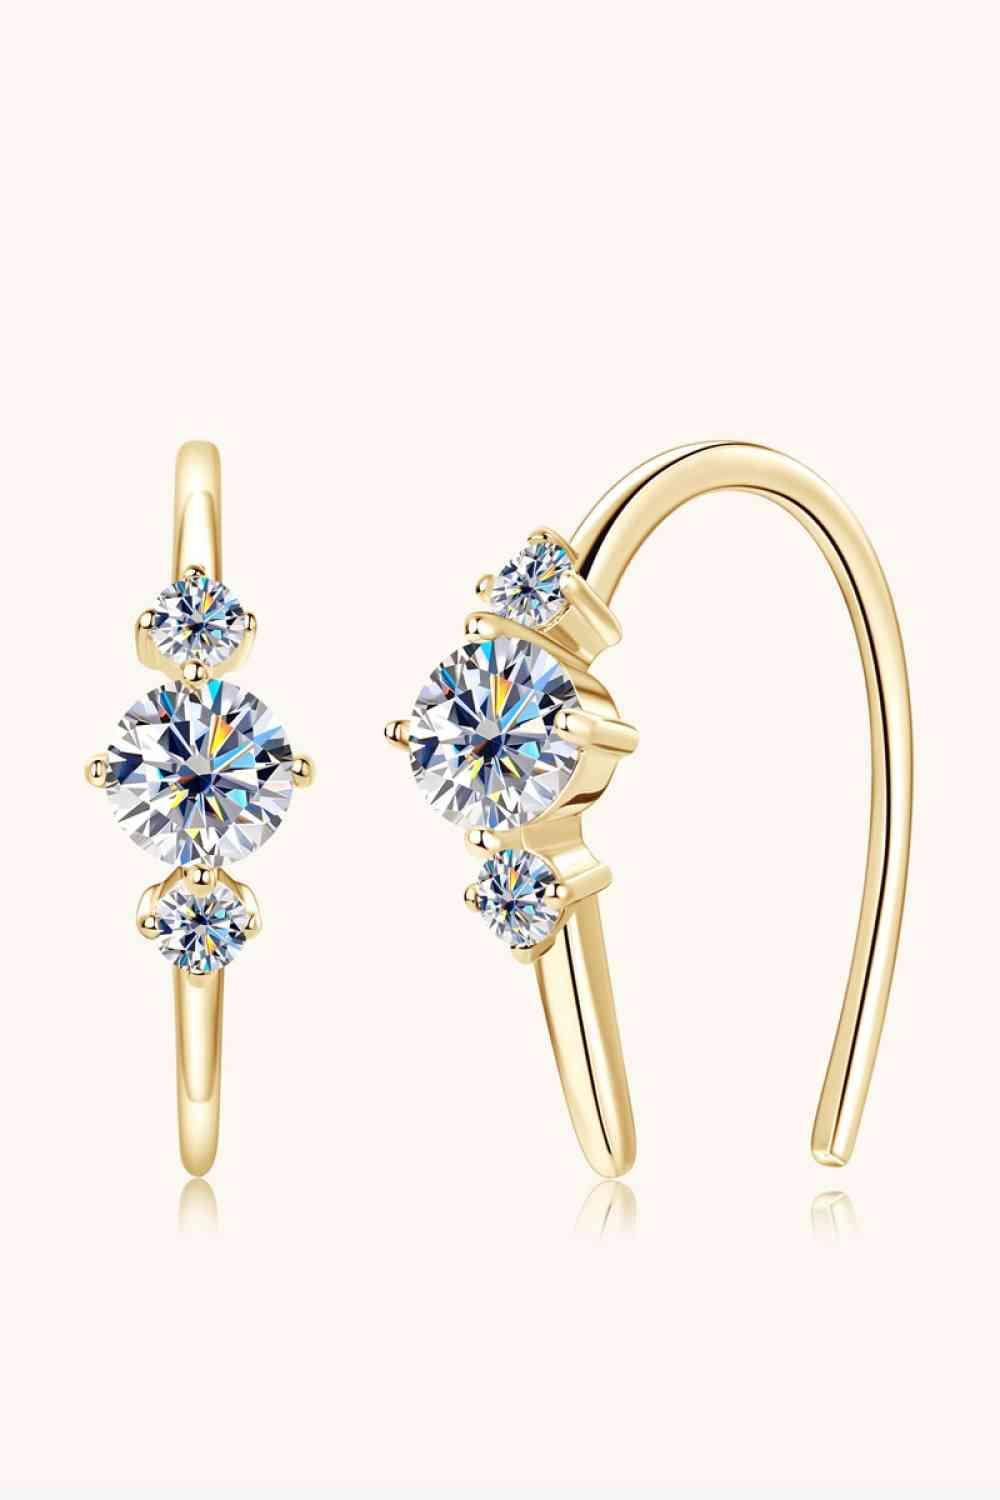 a pair of earrings with a crystal stone